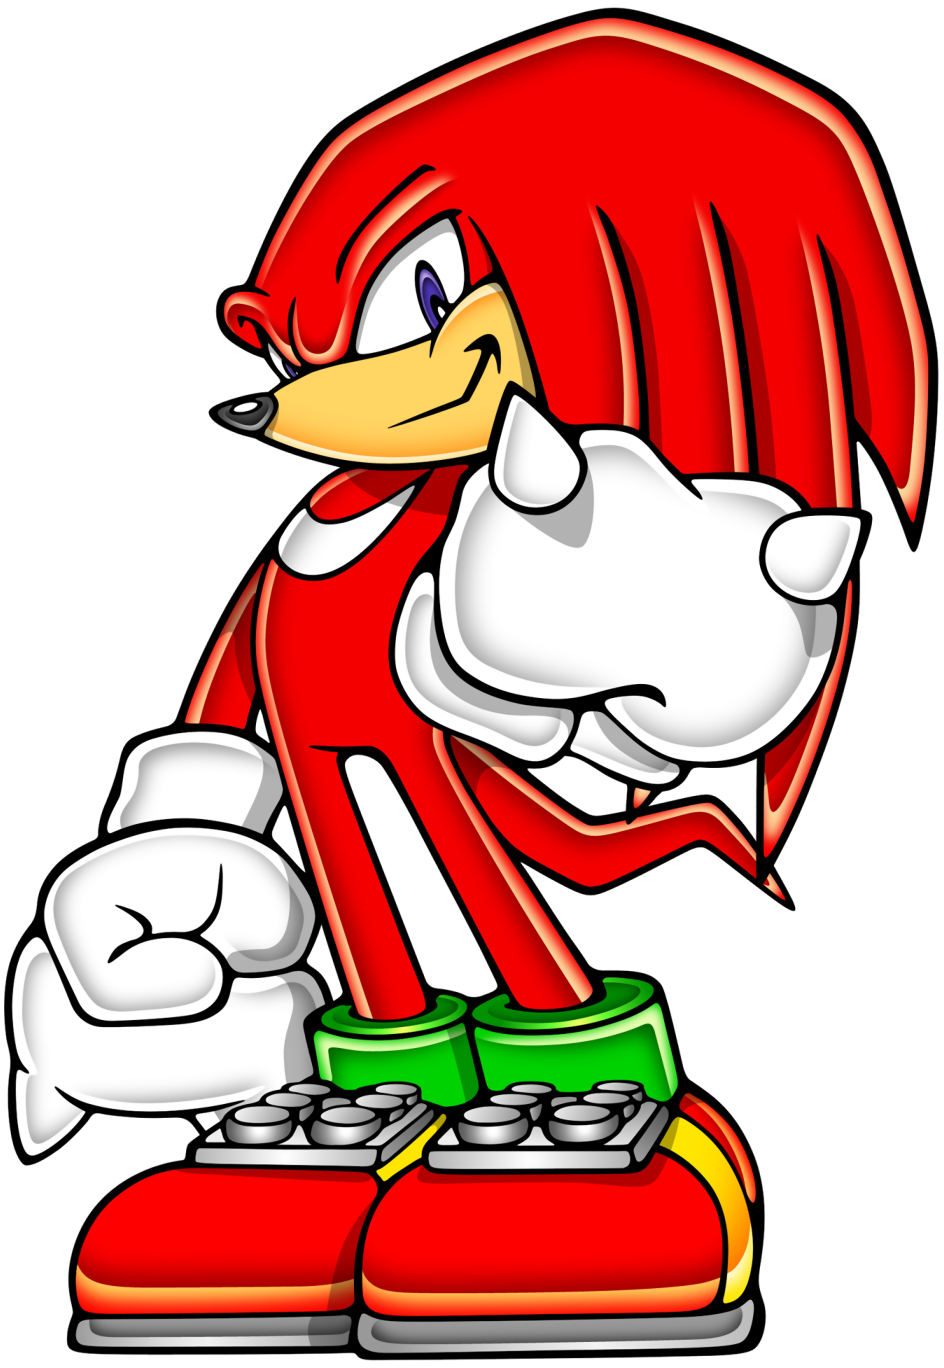 Knuckles gallery official art. Pointing clipart knuckle